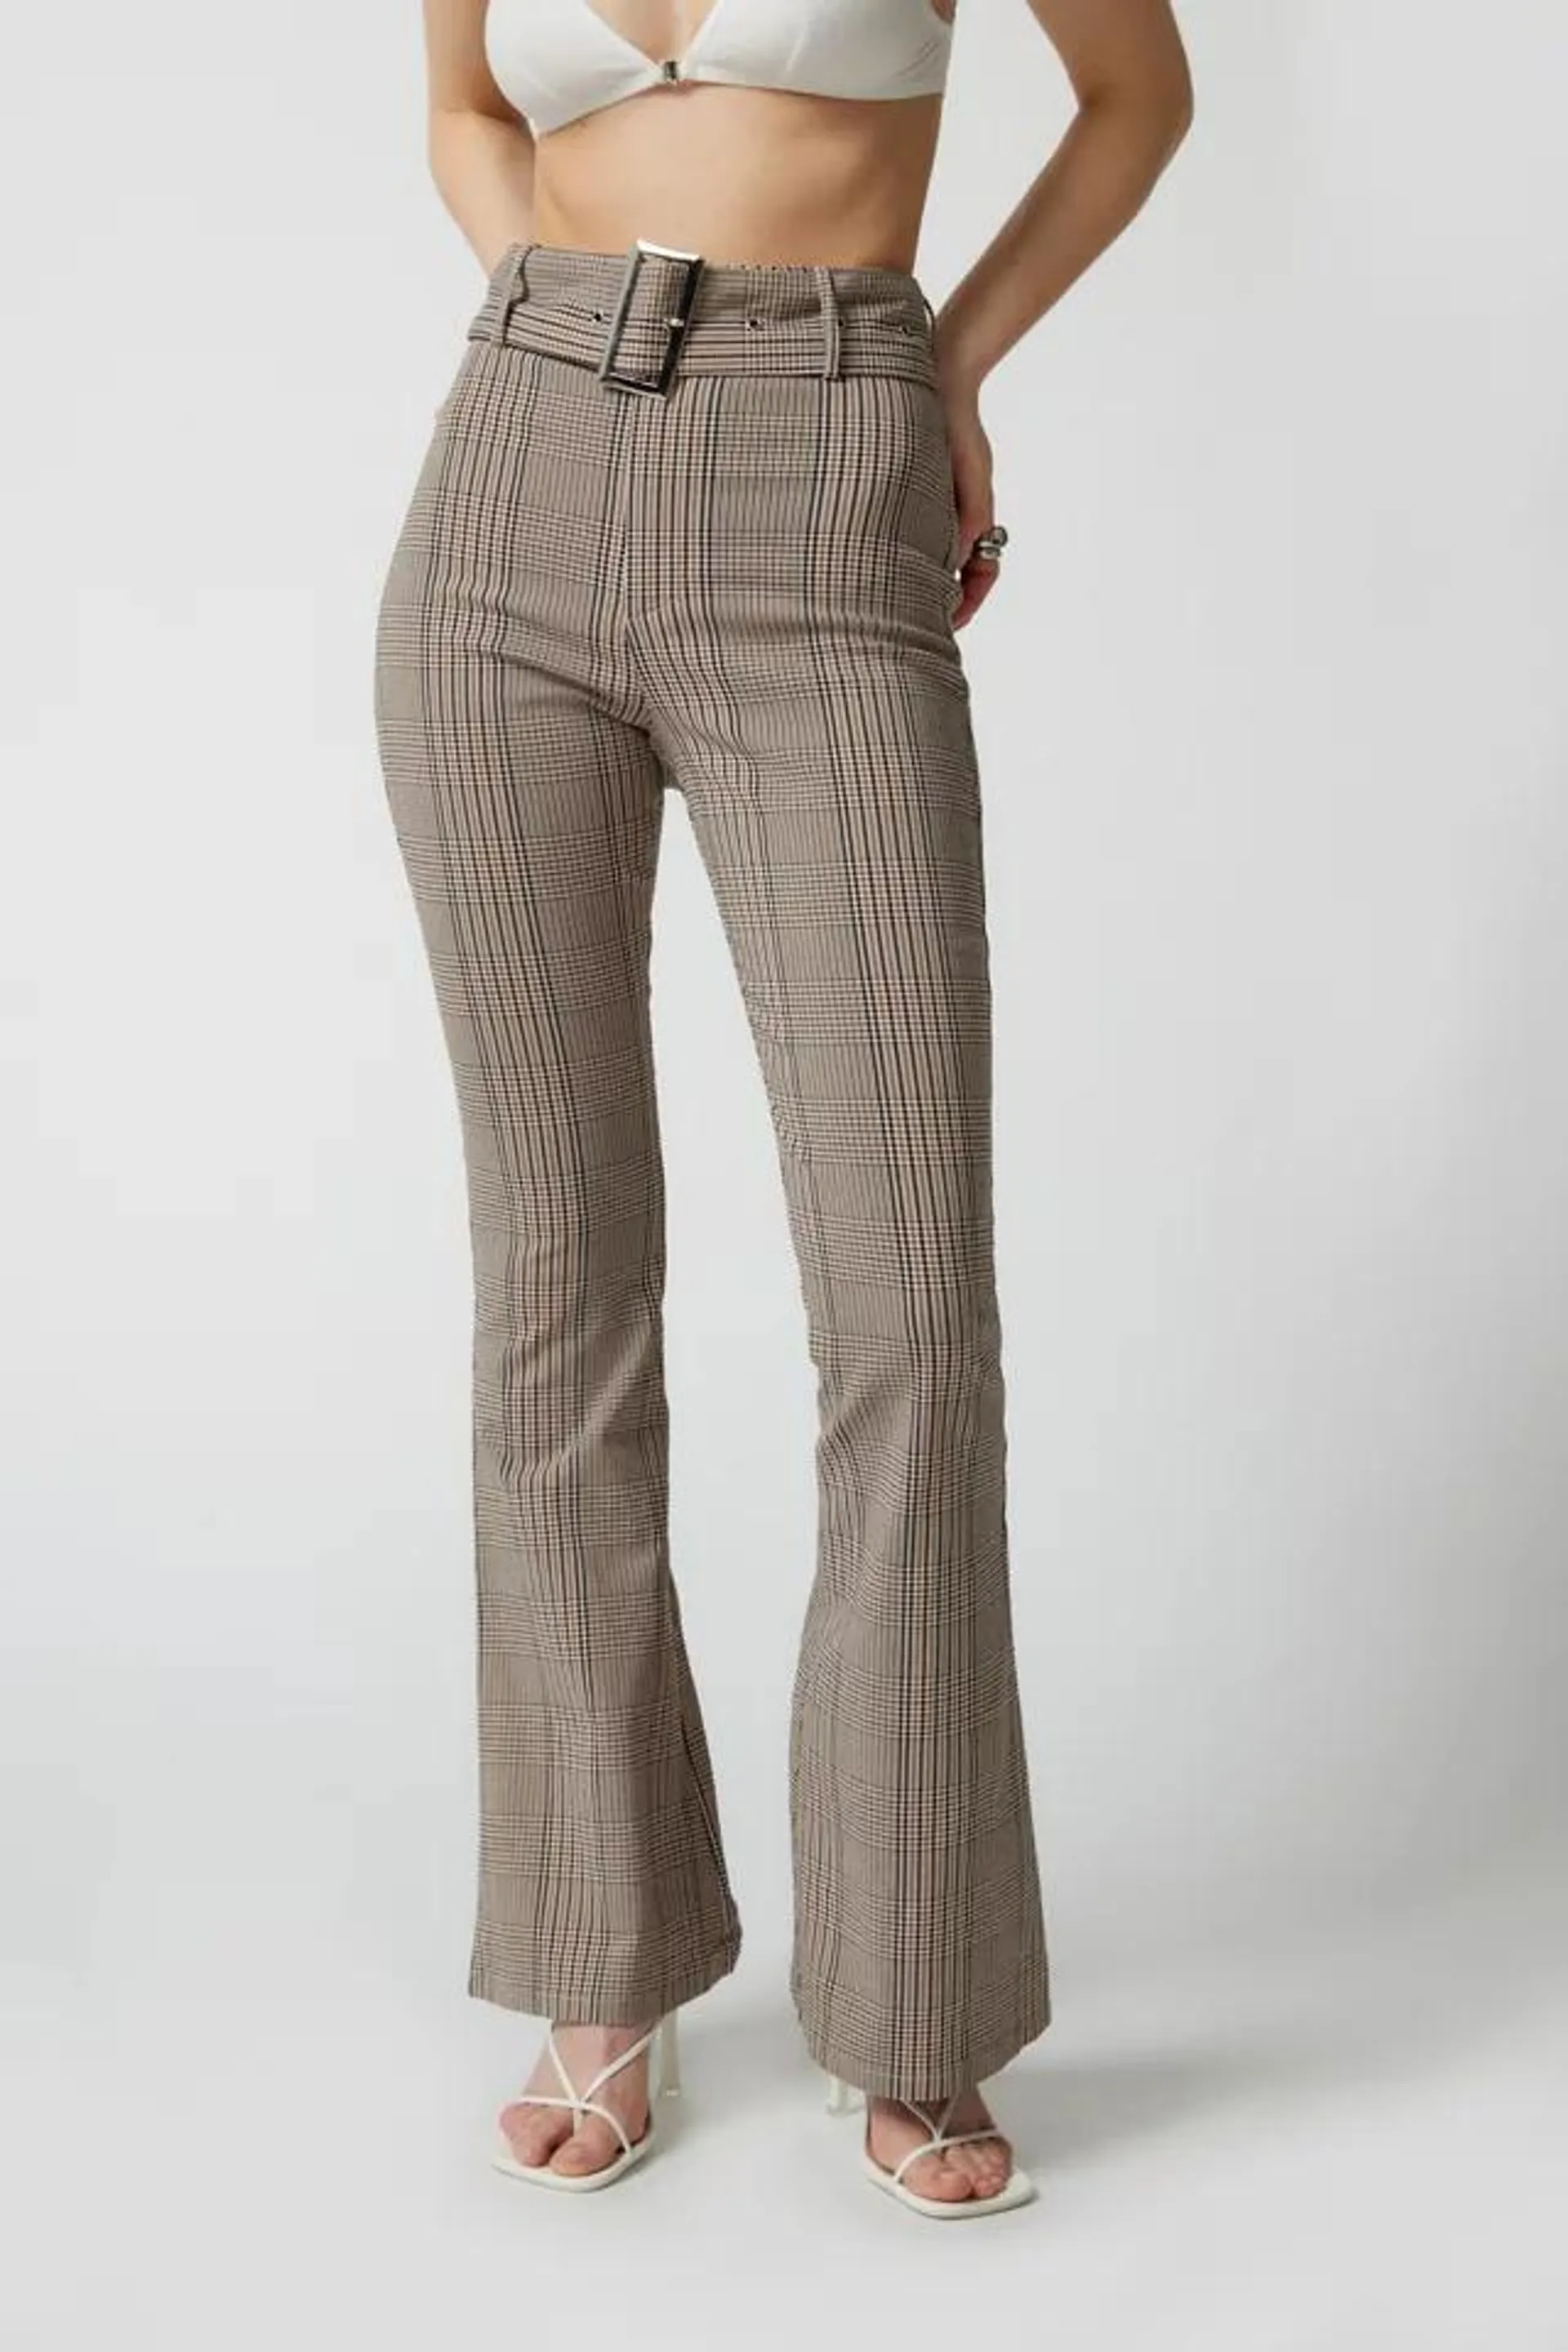 Daisy Street Checked Trouser Pant